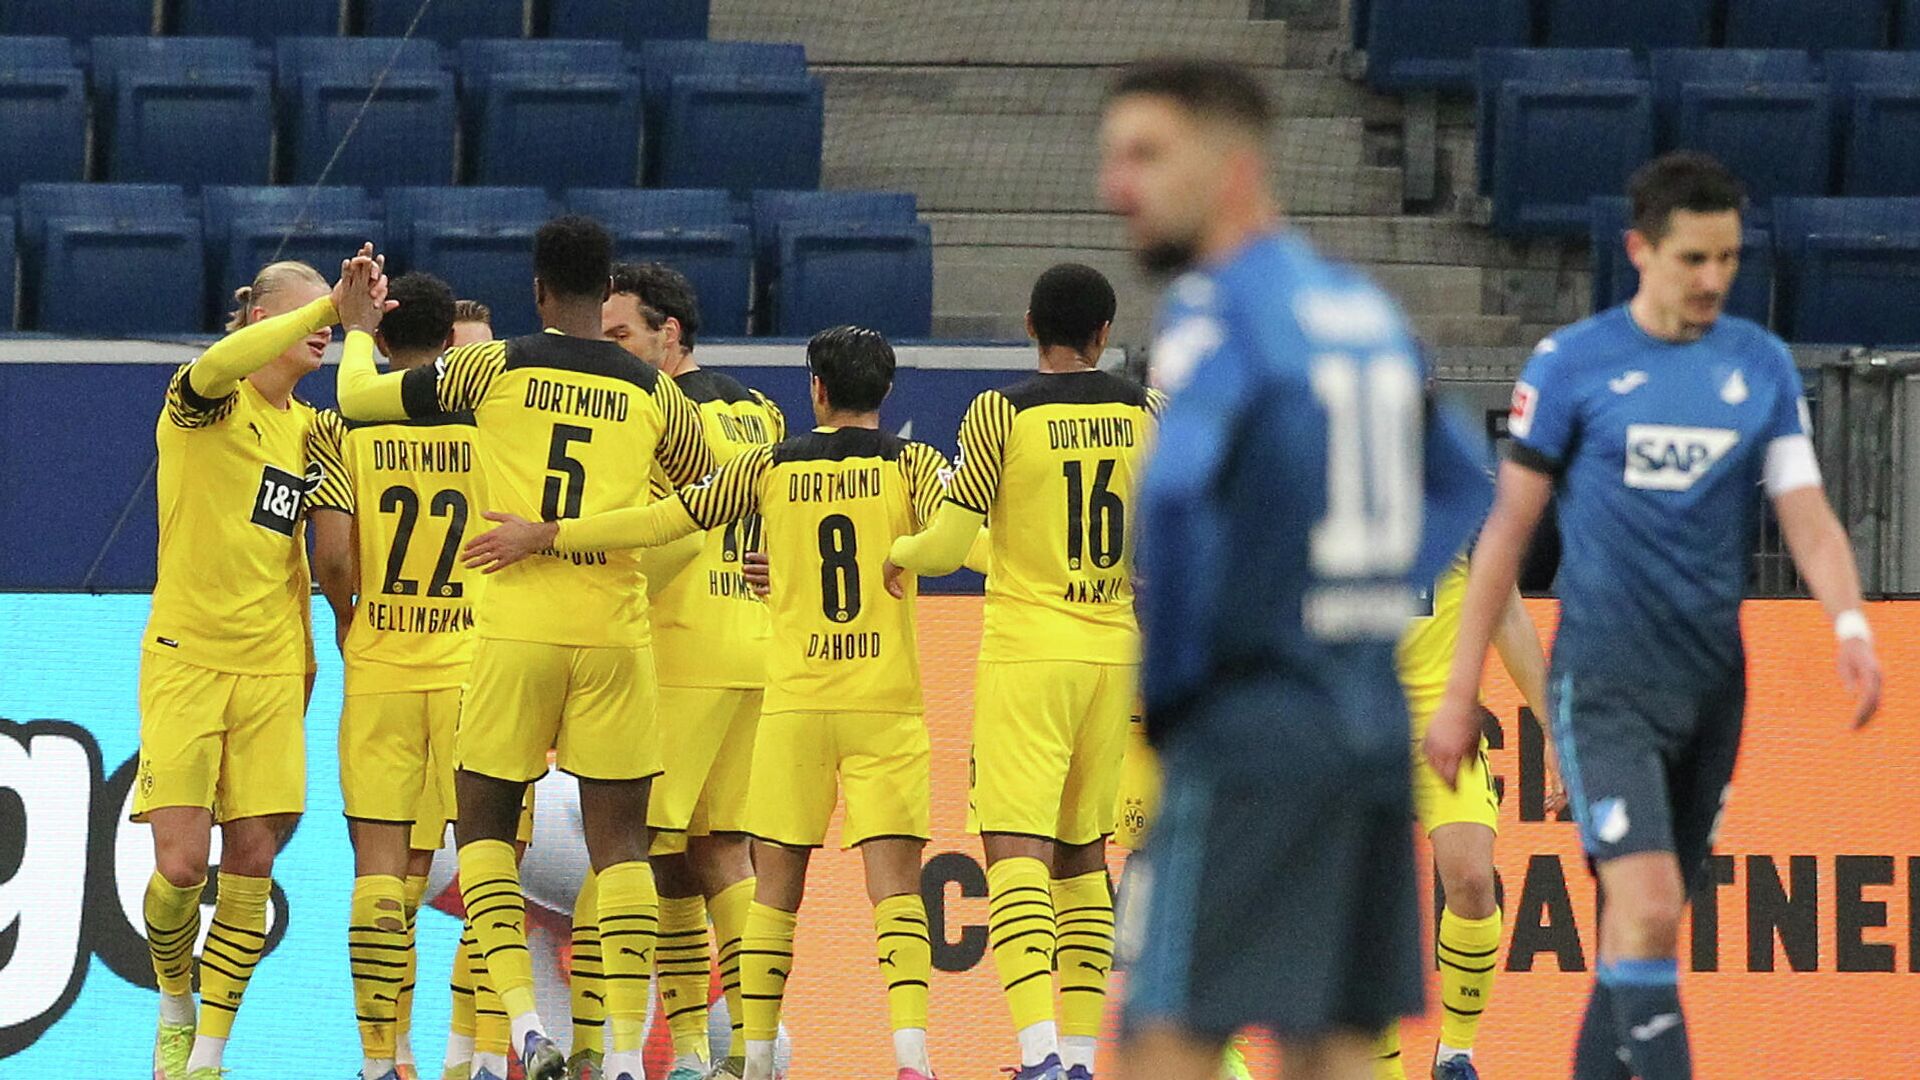 Dortmund's team celebrates scoring the 1-2 during the German first division Bundesliga football match between TSG Hoffenheim and Borussia Dortmund in Sinsheim on January 22, 2022. (Photo by Daniel ROLAND / AFP) / DFL REGULATIONS PROHIBIT ANY USE OF PHOTOGRAPHS AS IMAGE SEQUENCES AND/OR QUASI-VIDEO - РИА Новости, 1920, 22.01.2022